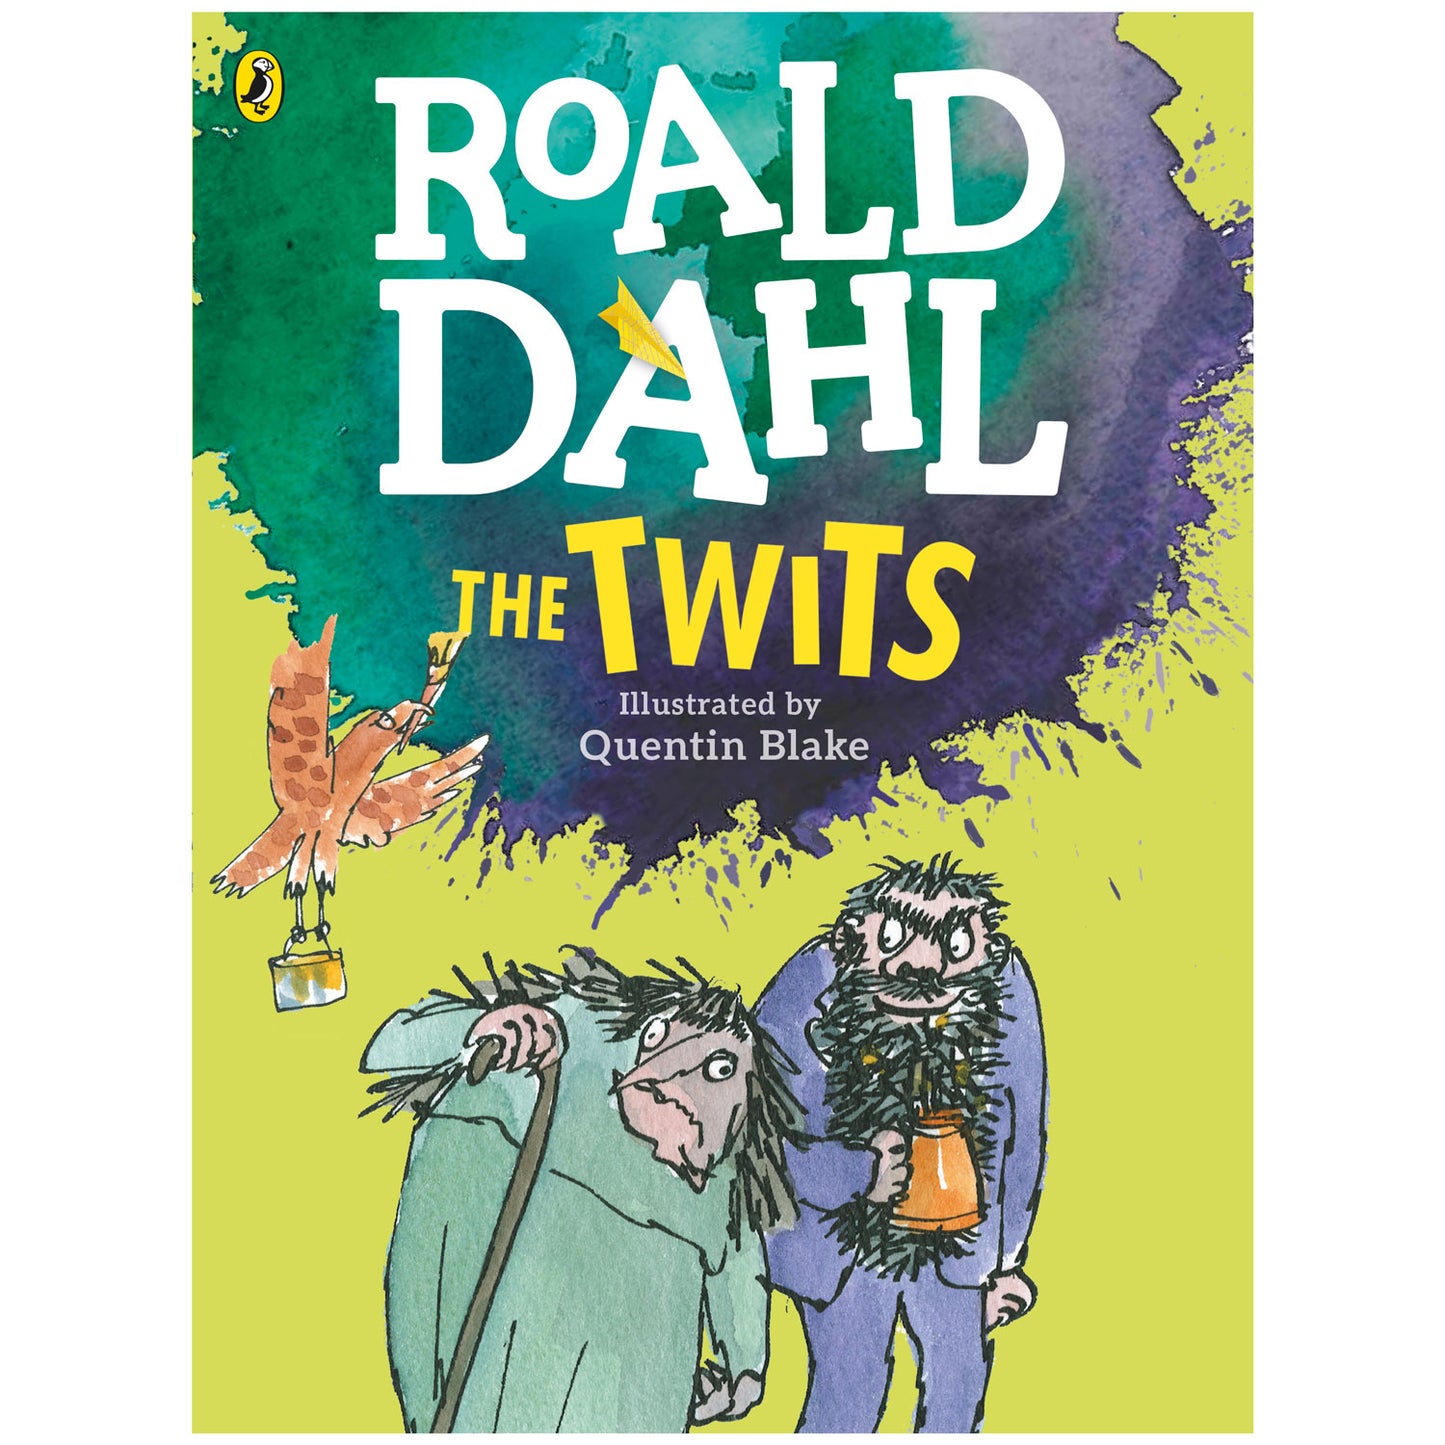 The Twits by Roald Dahl with illustrations by Quentin Blake